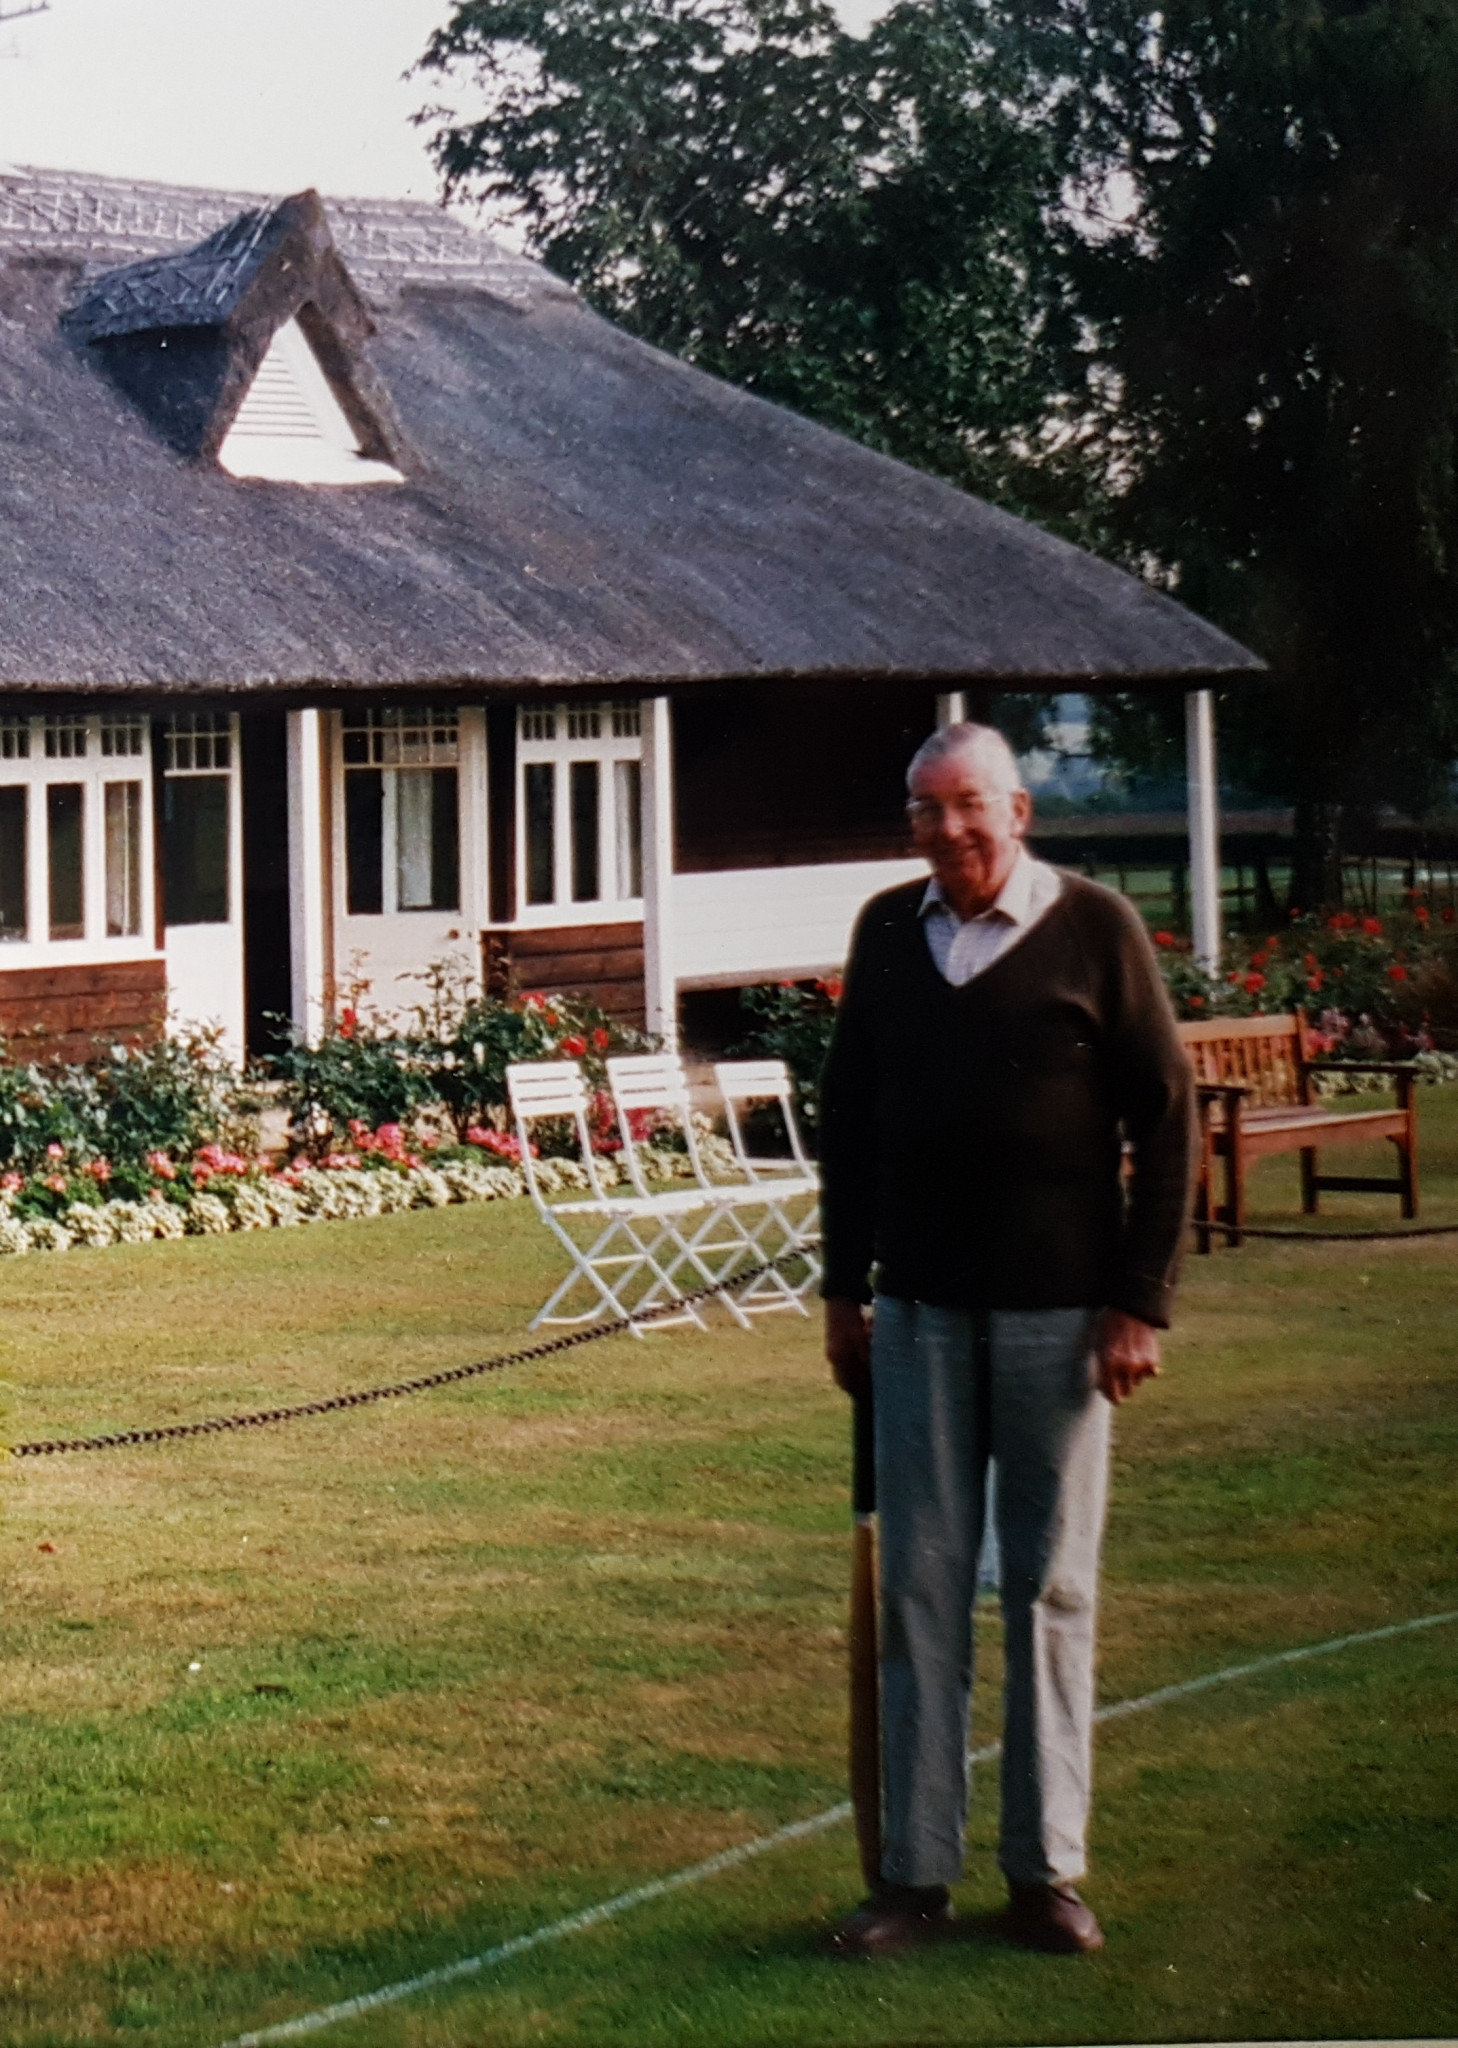 Captain Dick Hawkins at Everdon Hall cricket ground in the mid 1990s ©ITG